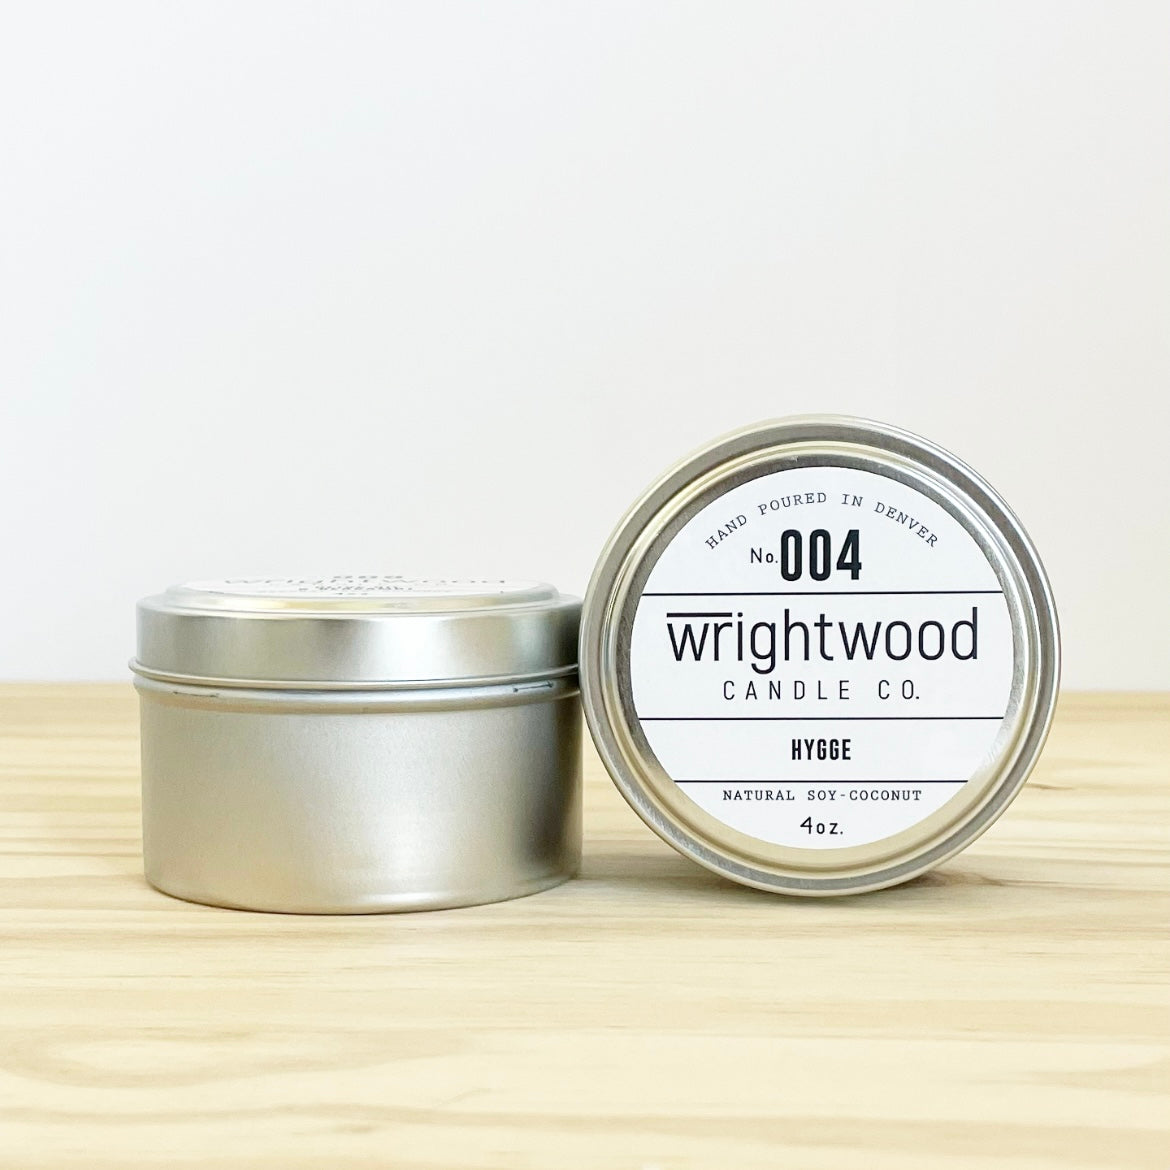 Two silver tins are on a wood table with a light colored background. The one on the left is upright while the one on the right has the lid facing outward with label visible. The label states the company name (Wrightwood Candle Co), scent name, what it is made out of (soy-coconut wax), where it is hand poured (Denver) and item weight (4oz.)